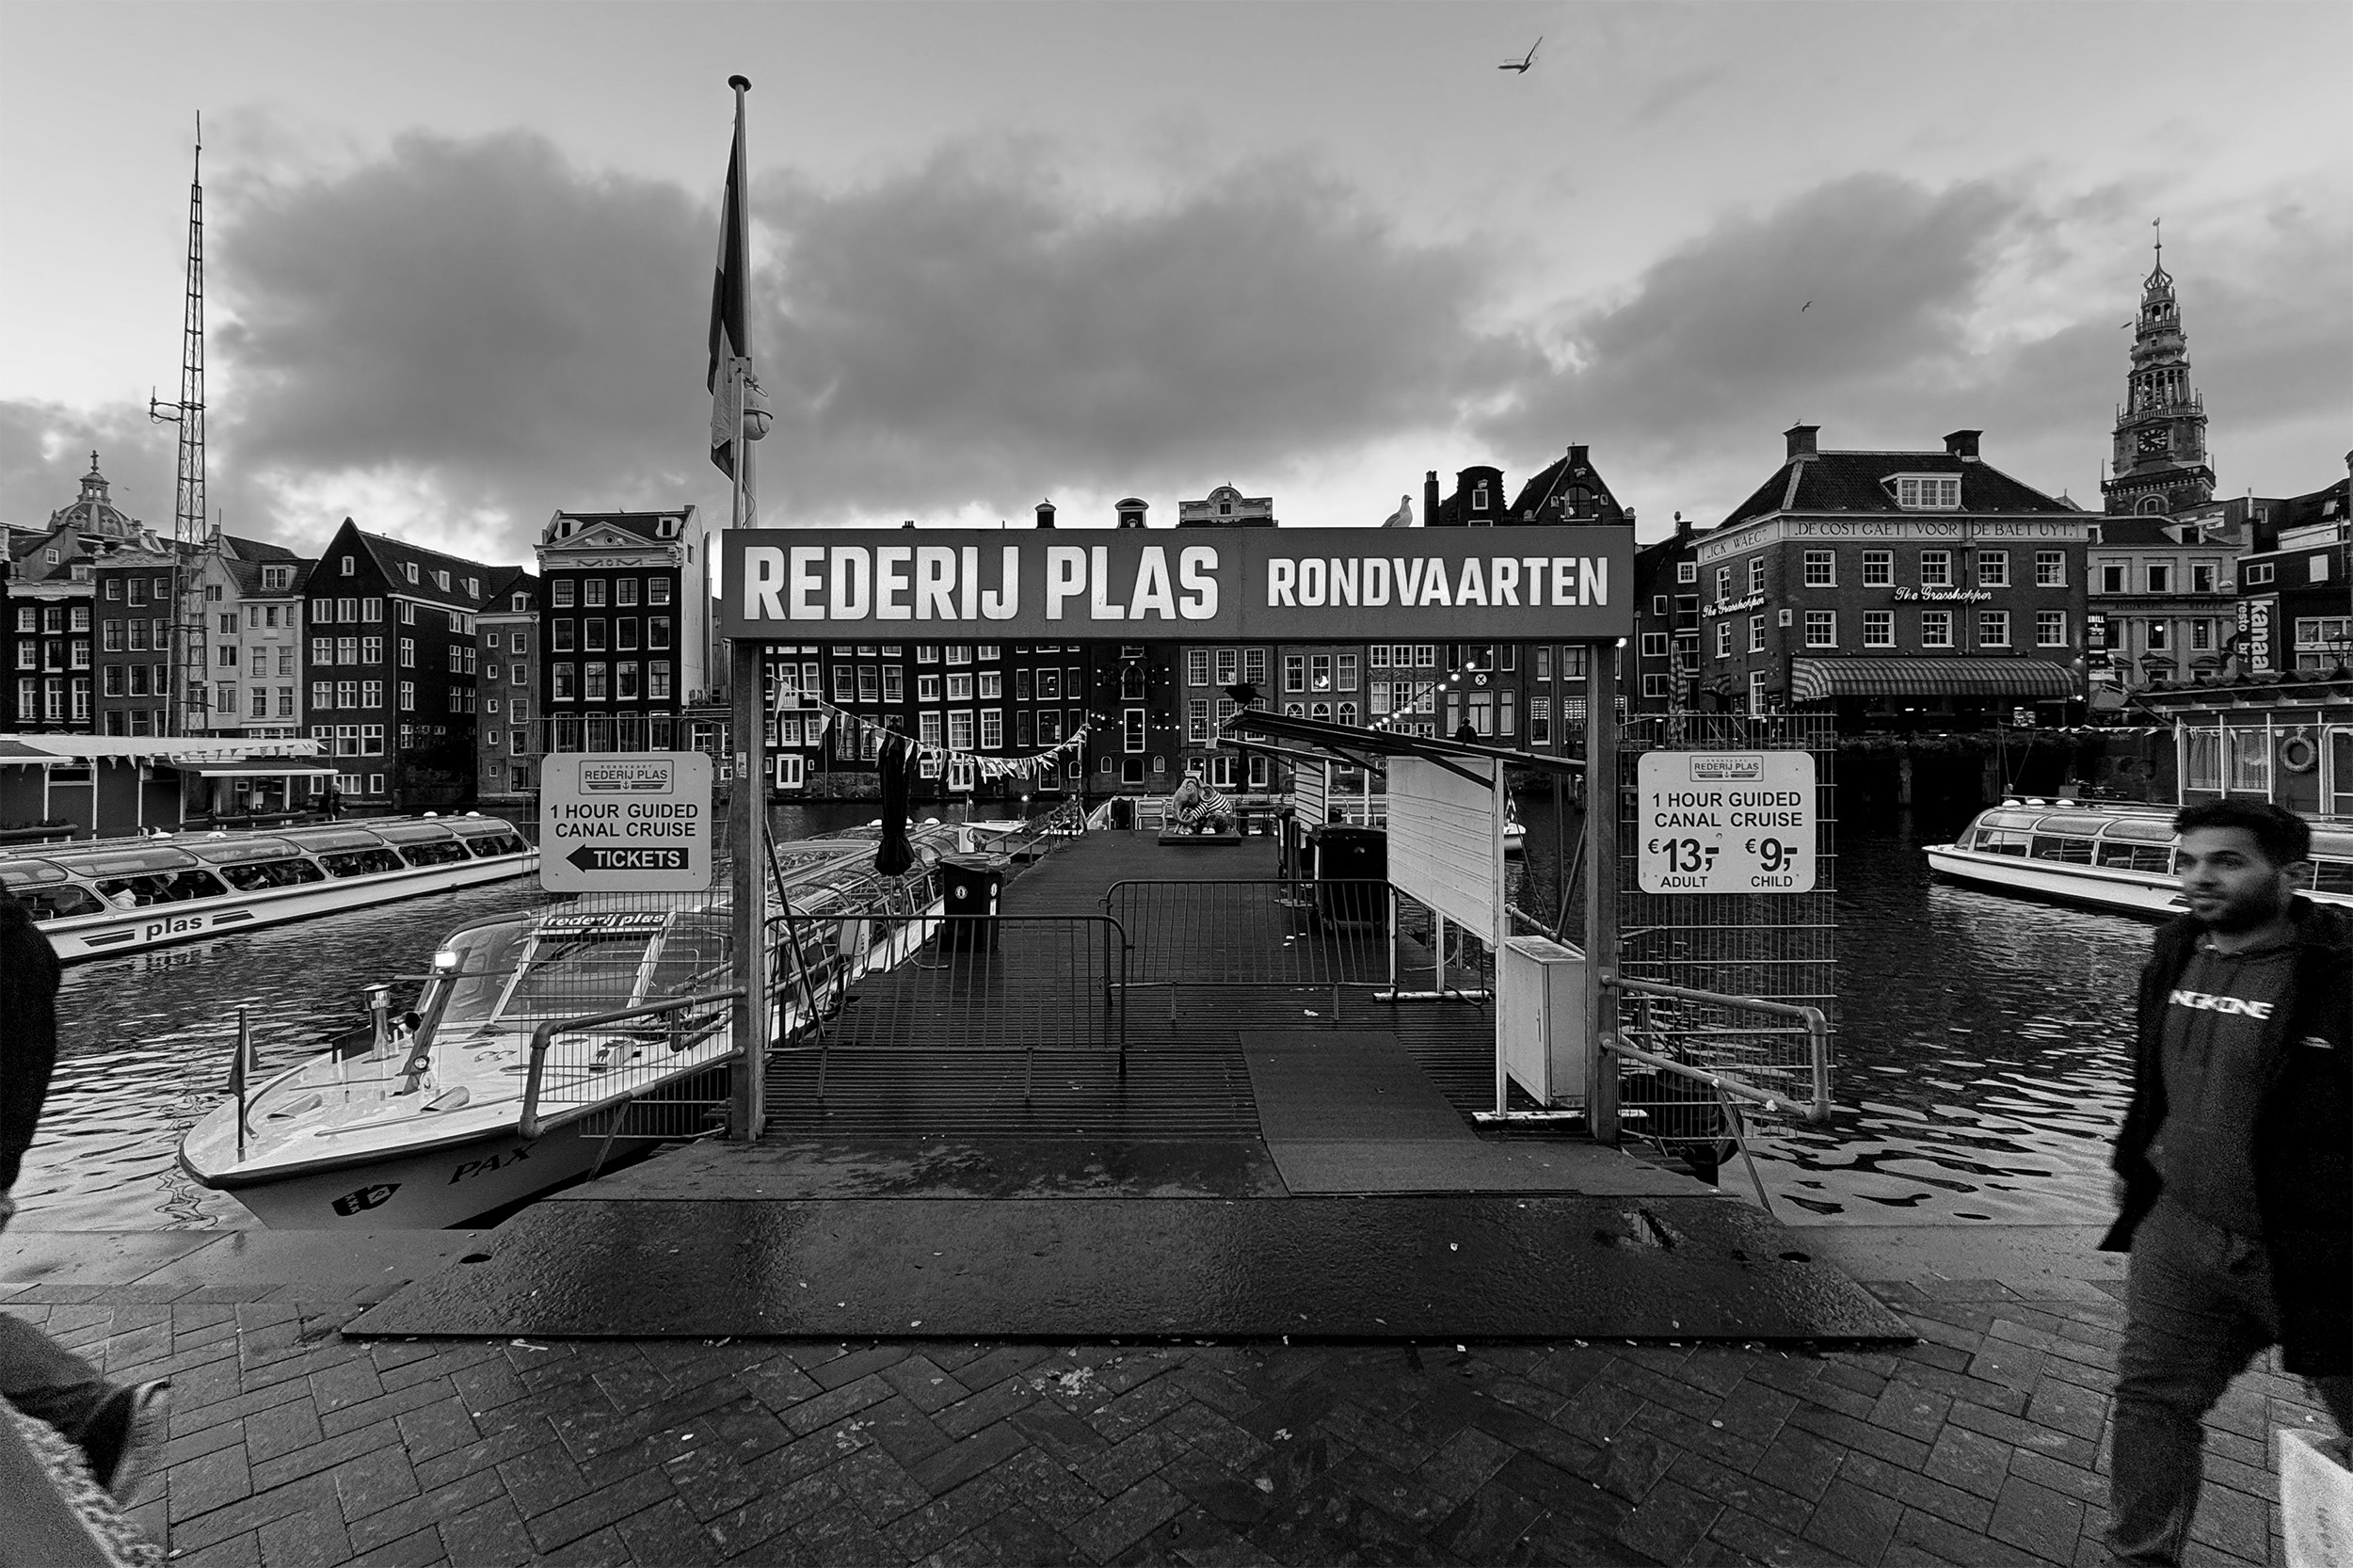 A snapshot of "Rederij Plas" in Amsterdam, where many boat tours start.